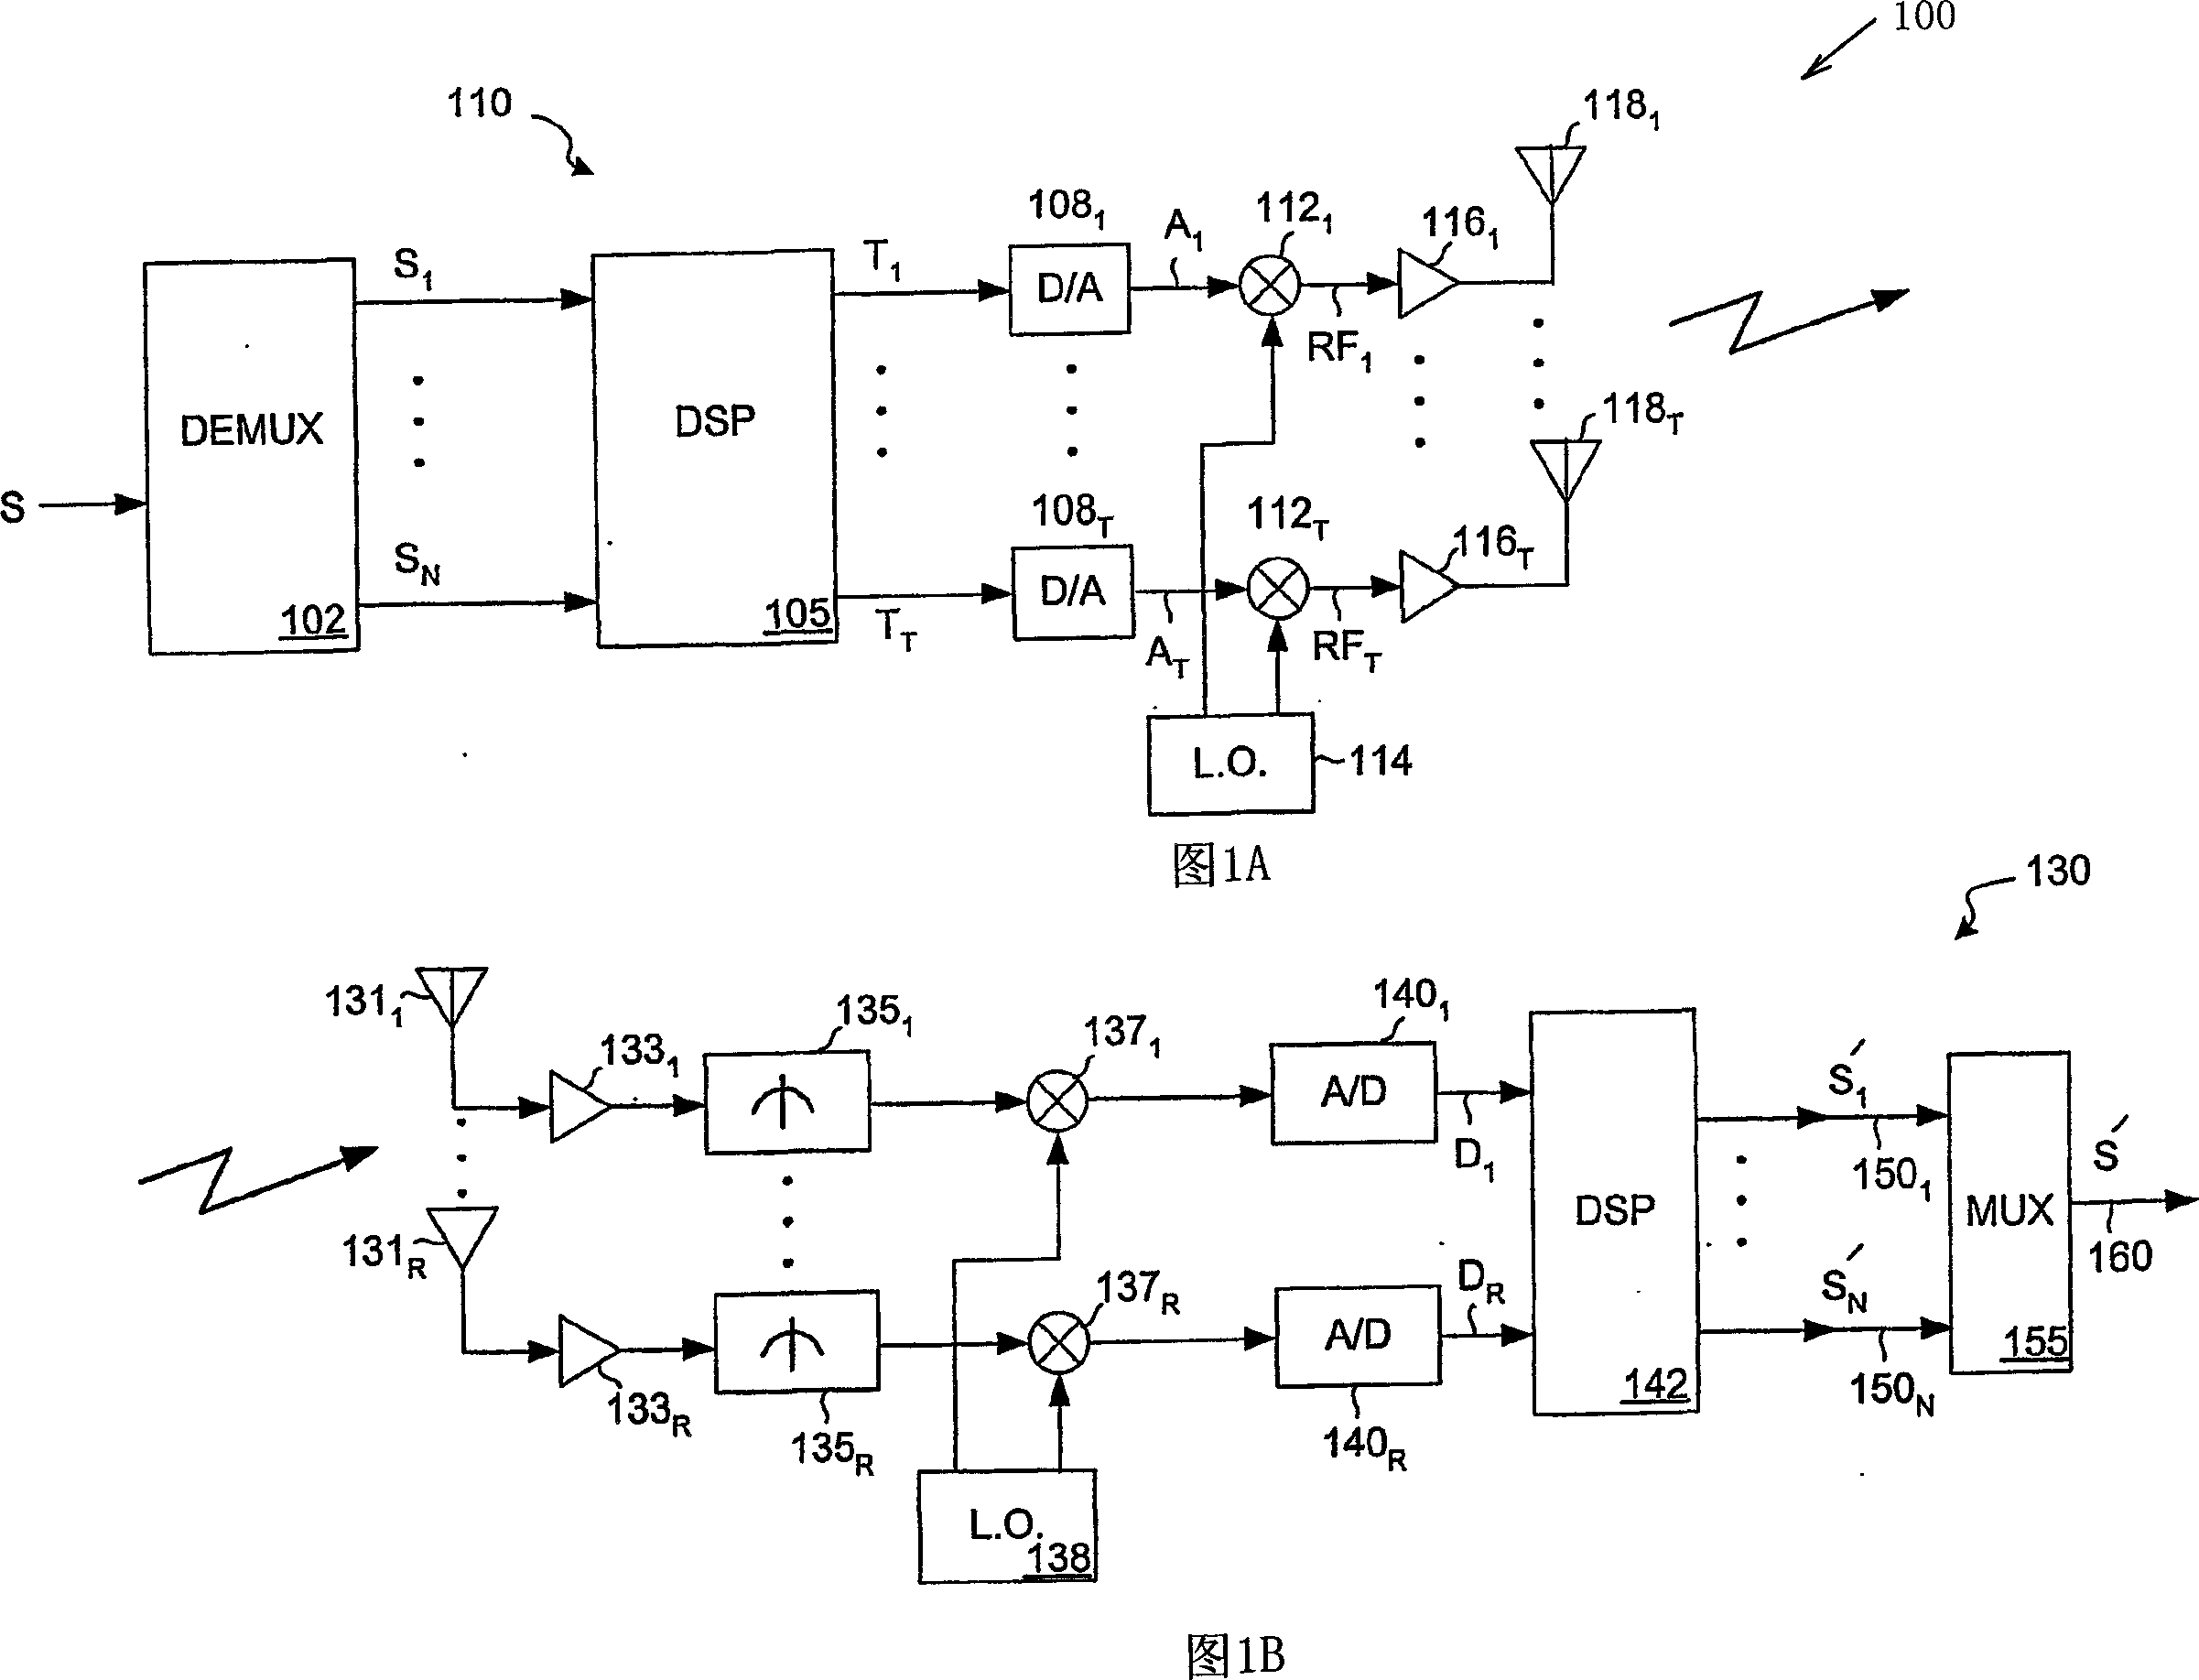 System and method for RF signal combining and adaptive bit loading for data rate maximization in multi-antenna communication systems